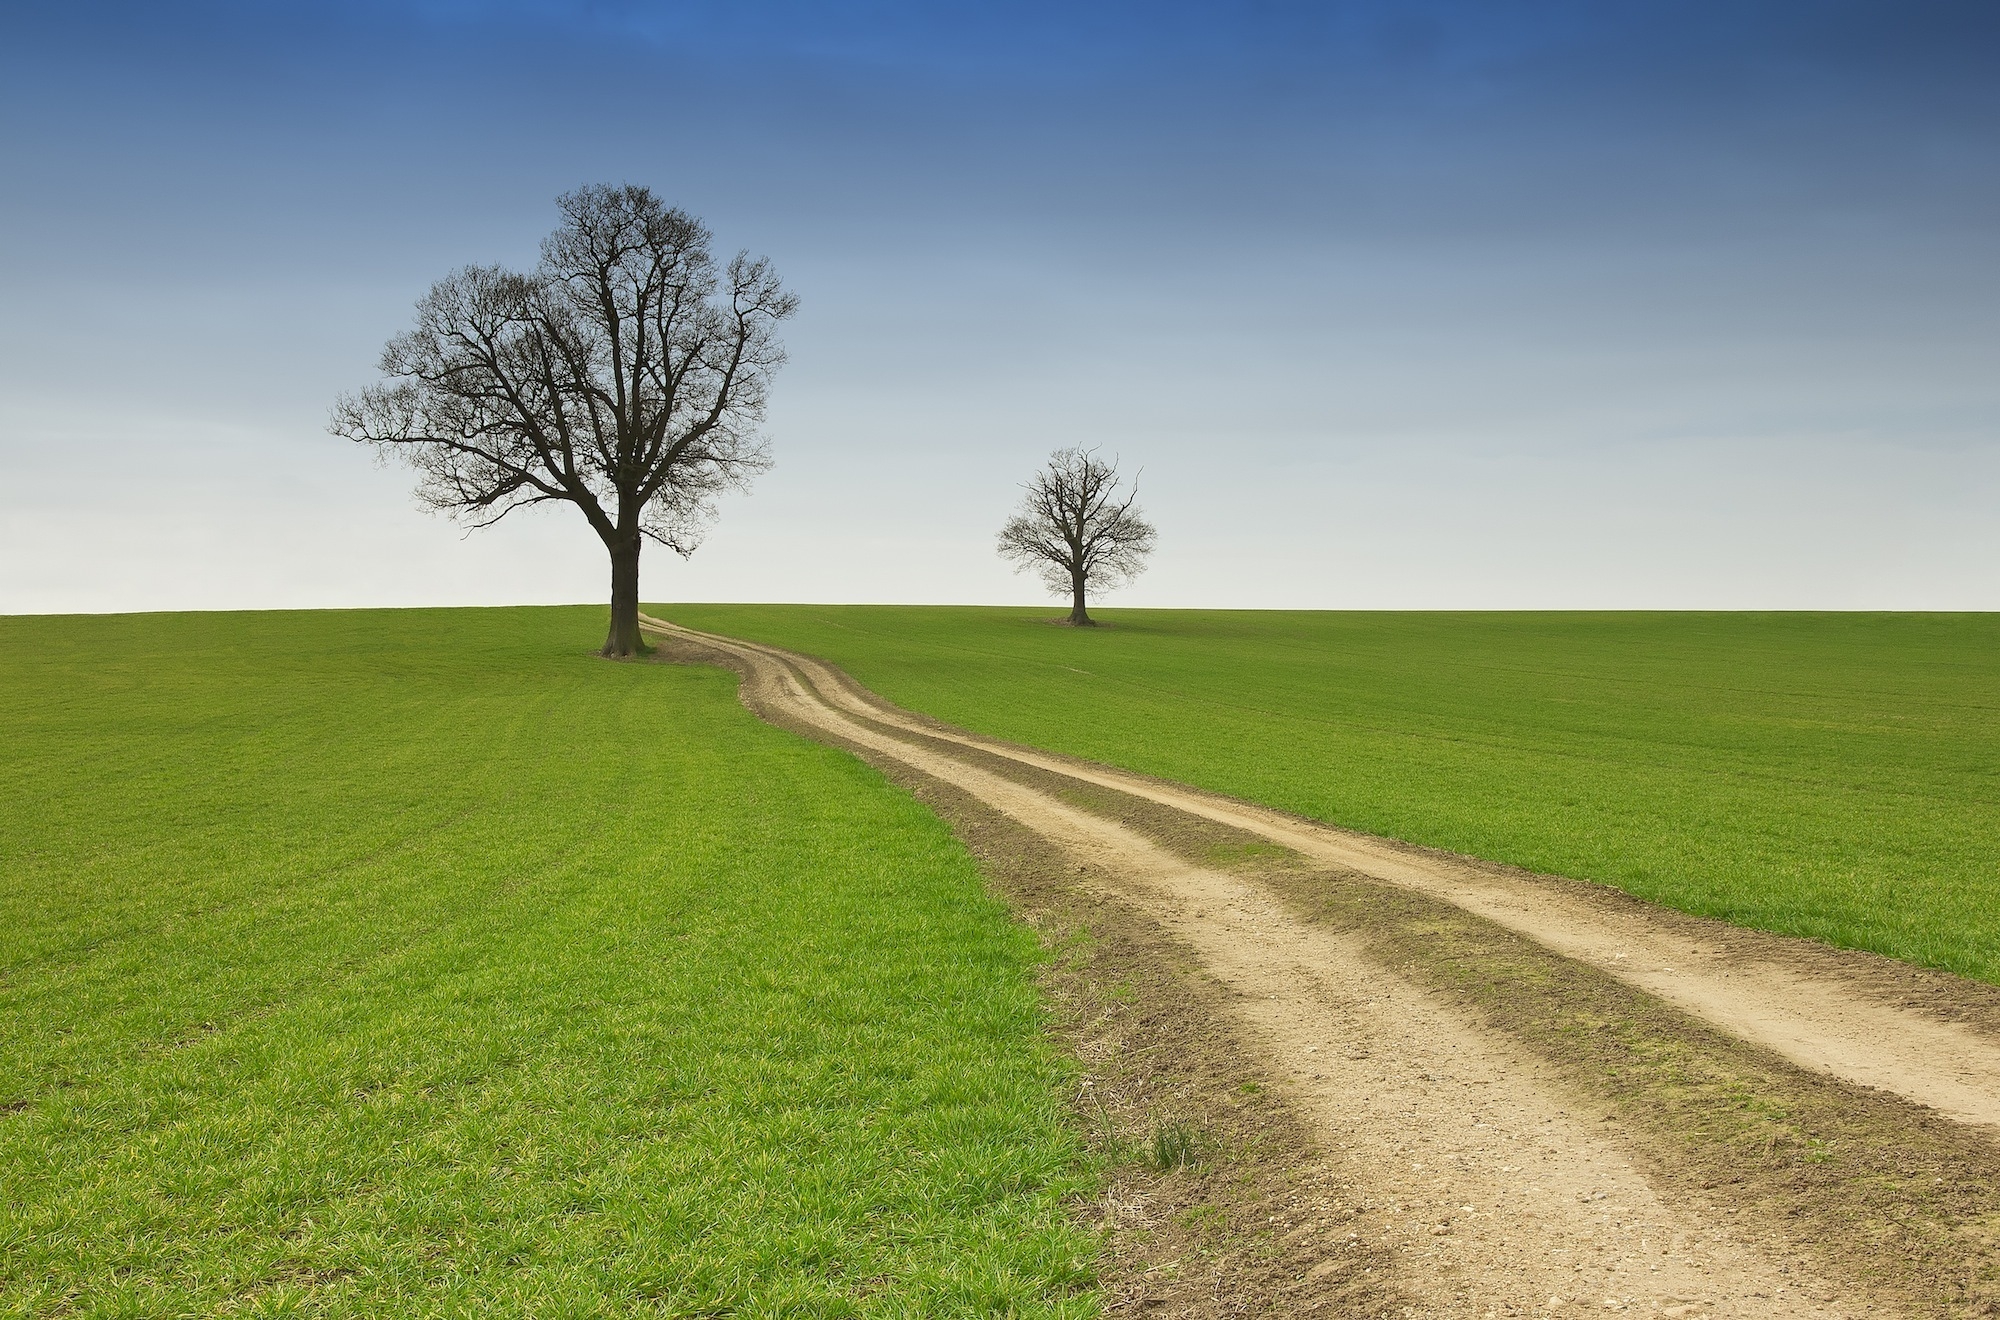 Download PC Wallpaper trees, nature, road, summer, field, country, emptiness, void, countryside